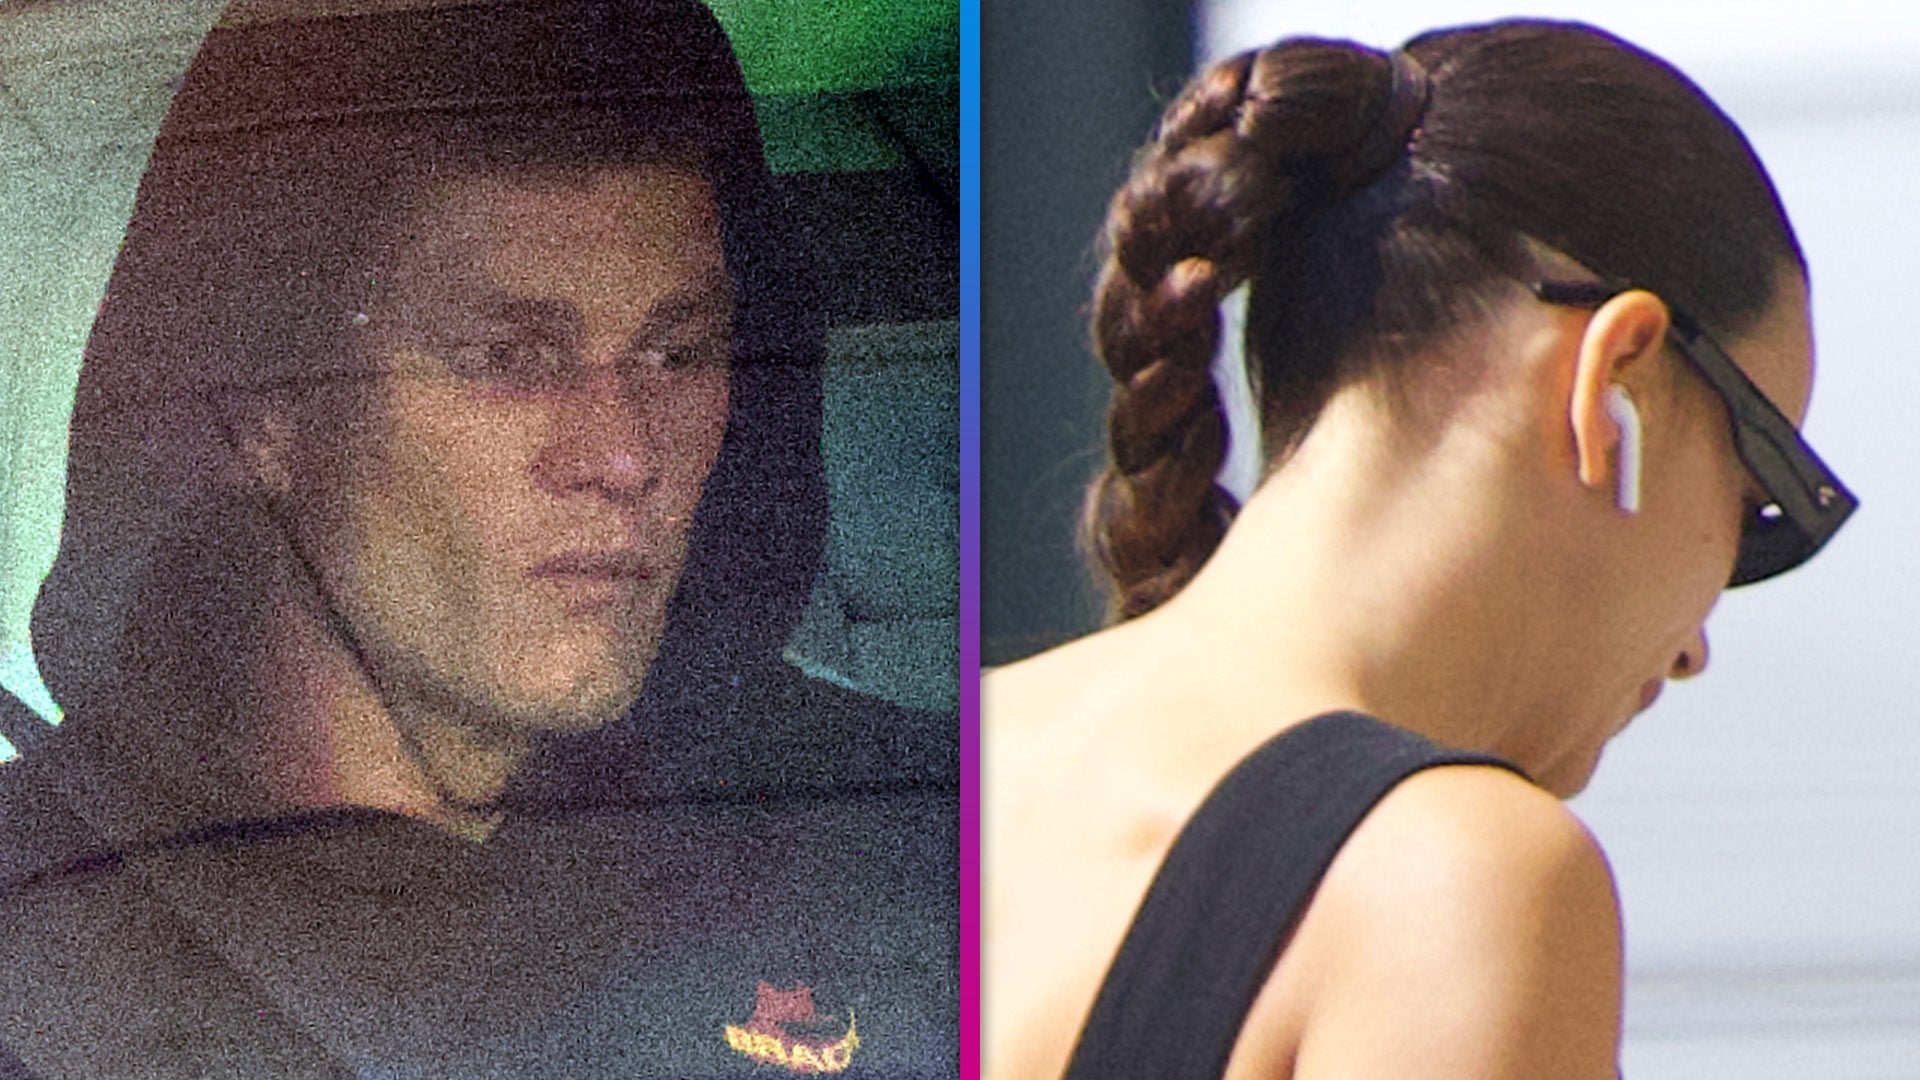 Tom Brady and Irina Shayk Avoid Being Photographed Together Entering His New York Apartment